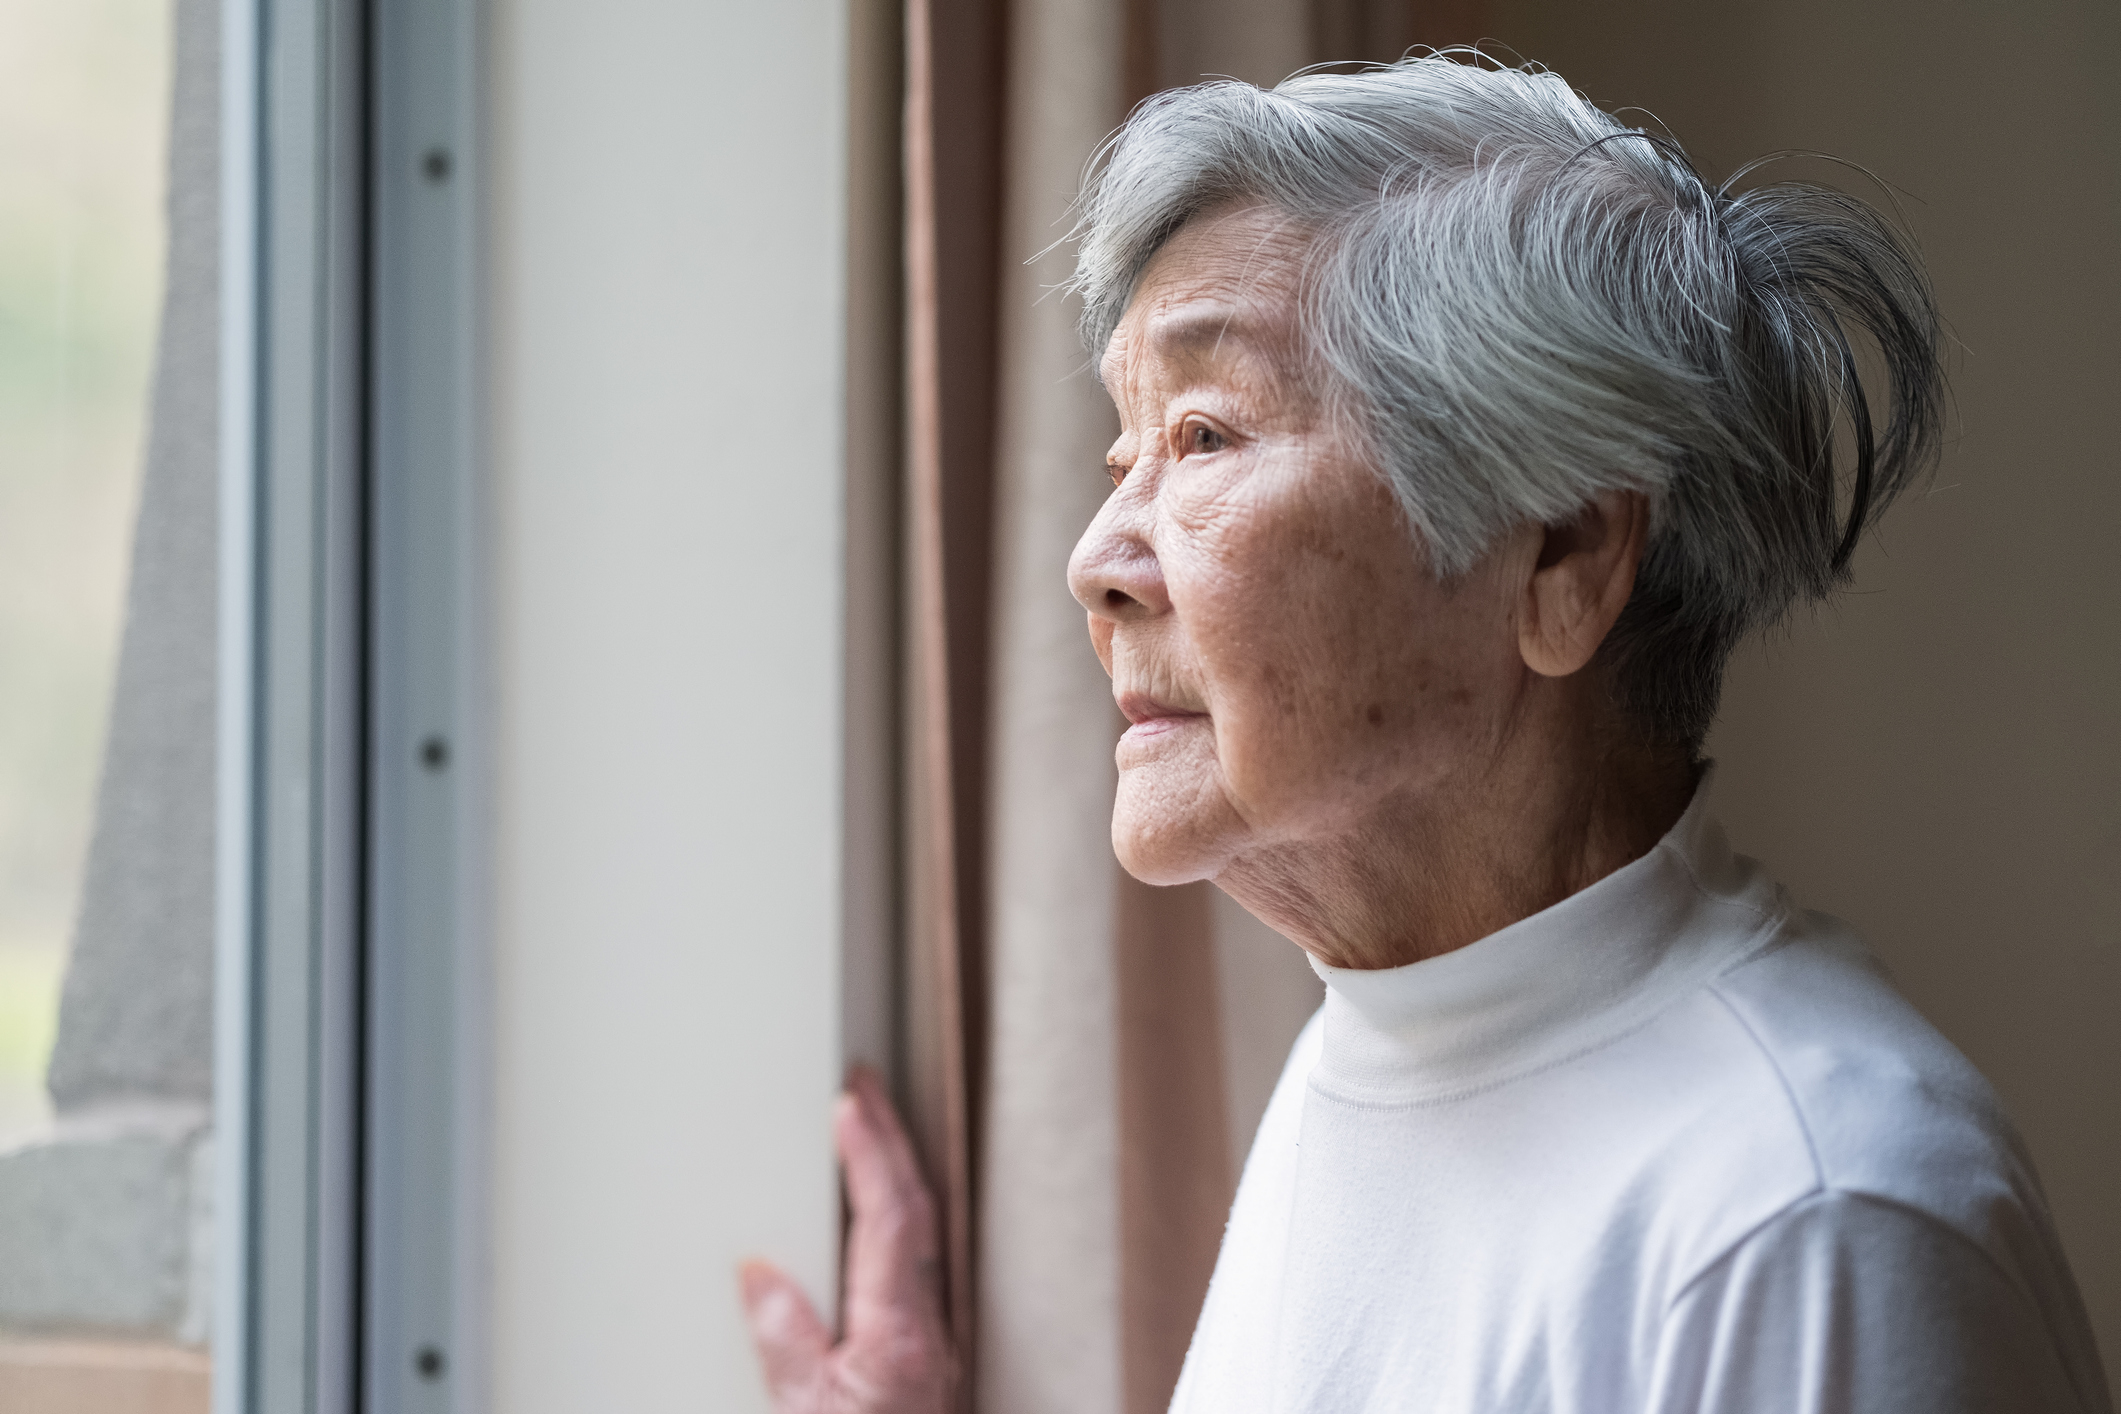 Elderly woman with short hair, in a white turtleneck, looking contemplatively out a window, hand resting on the curtain